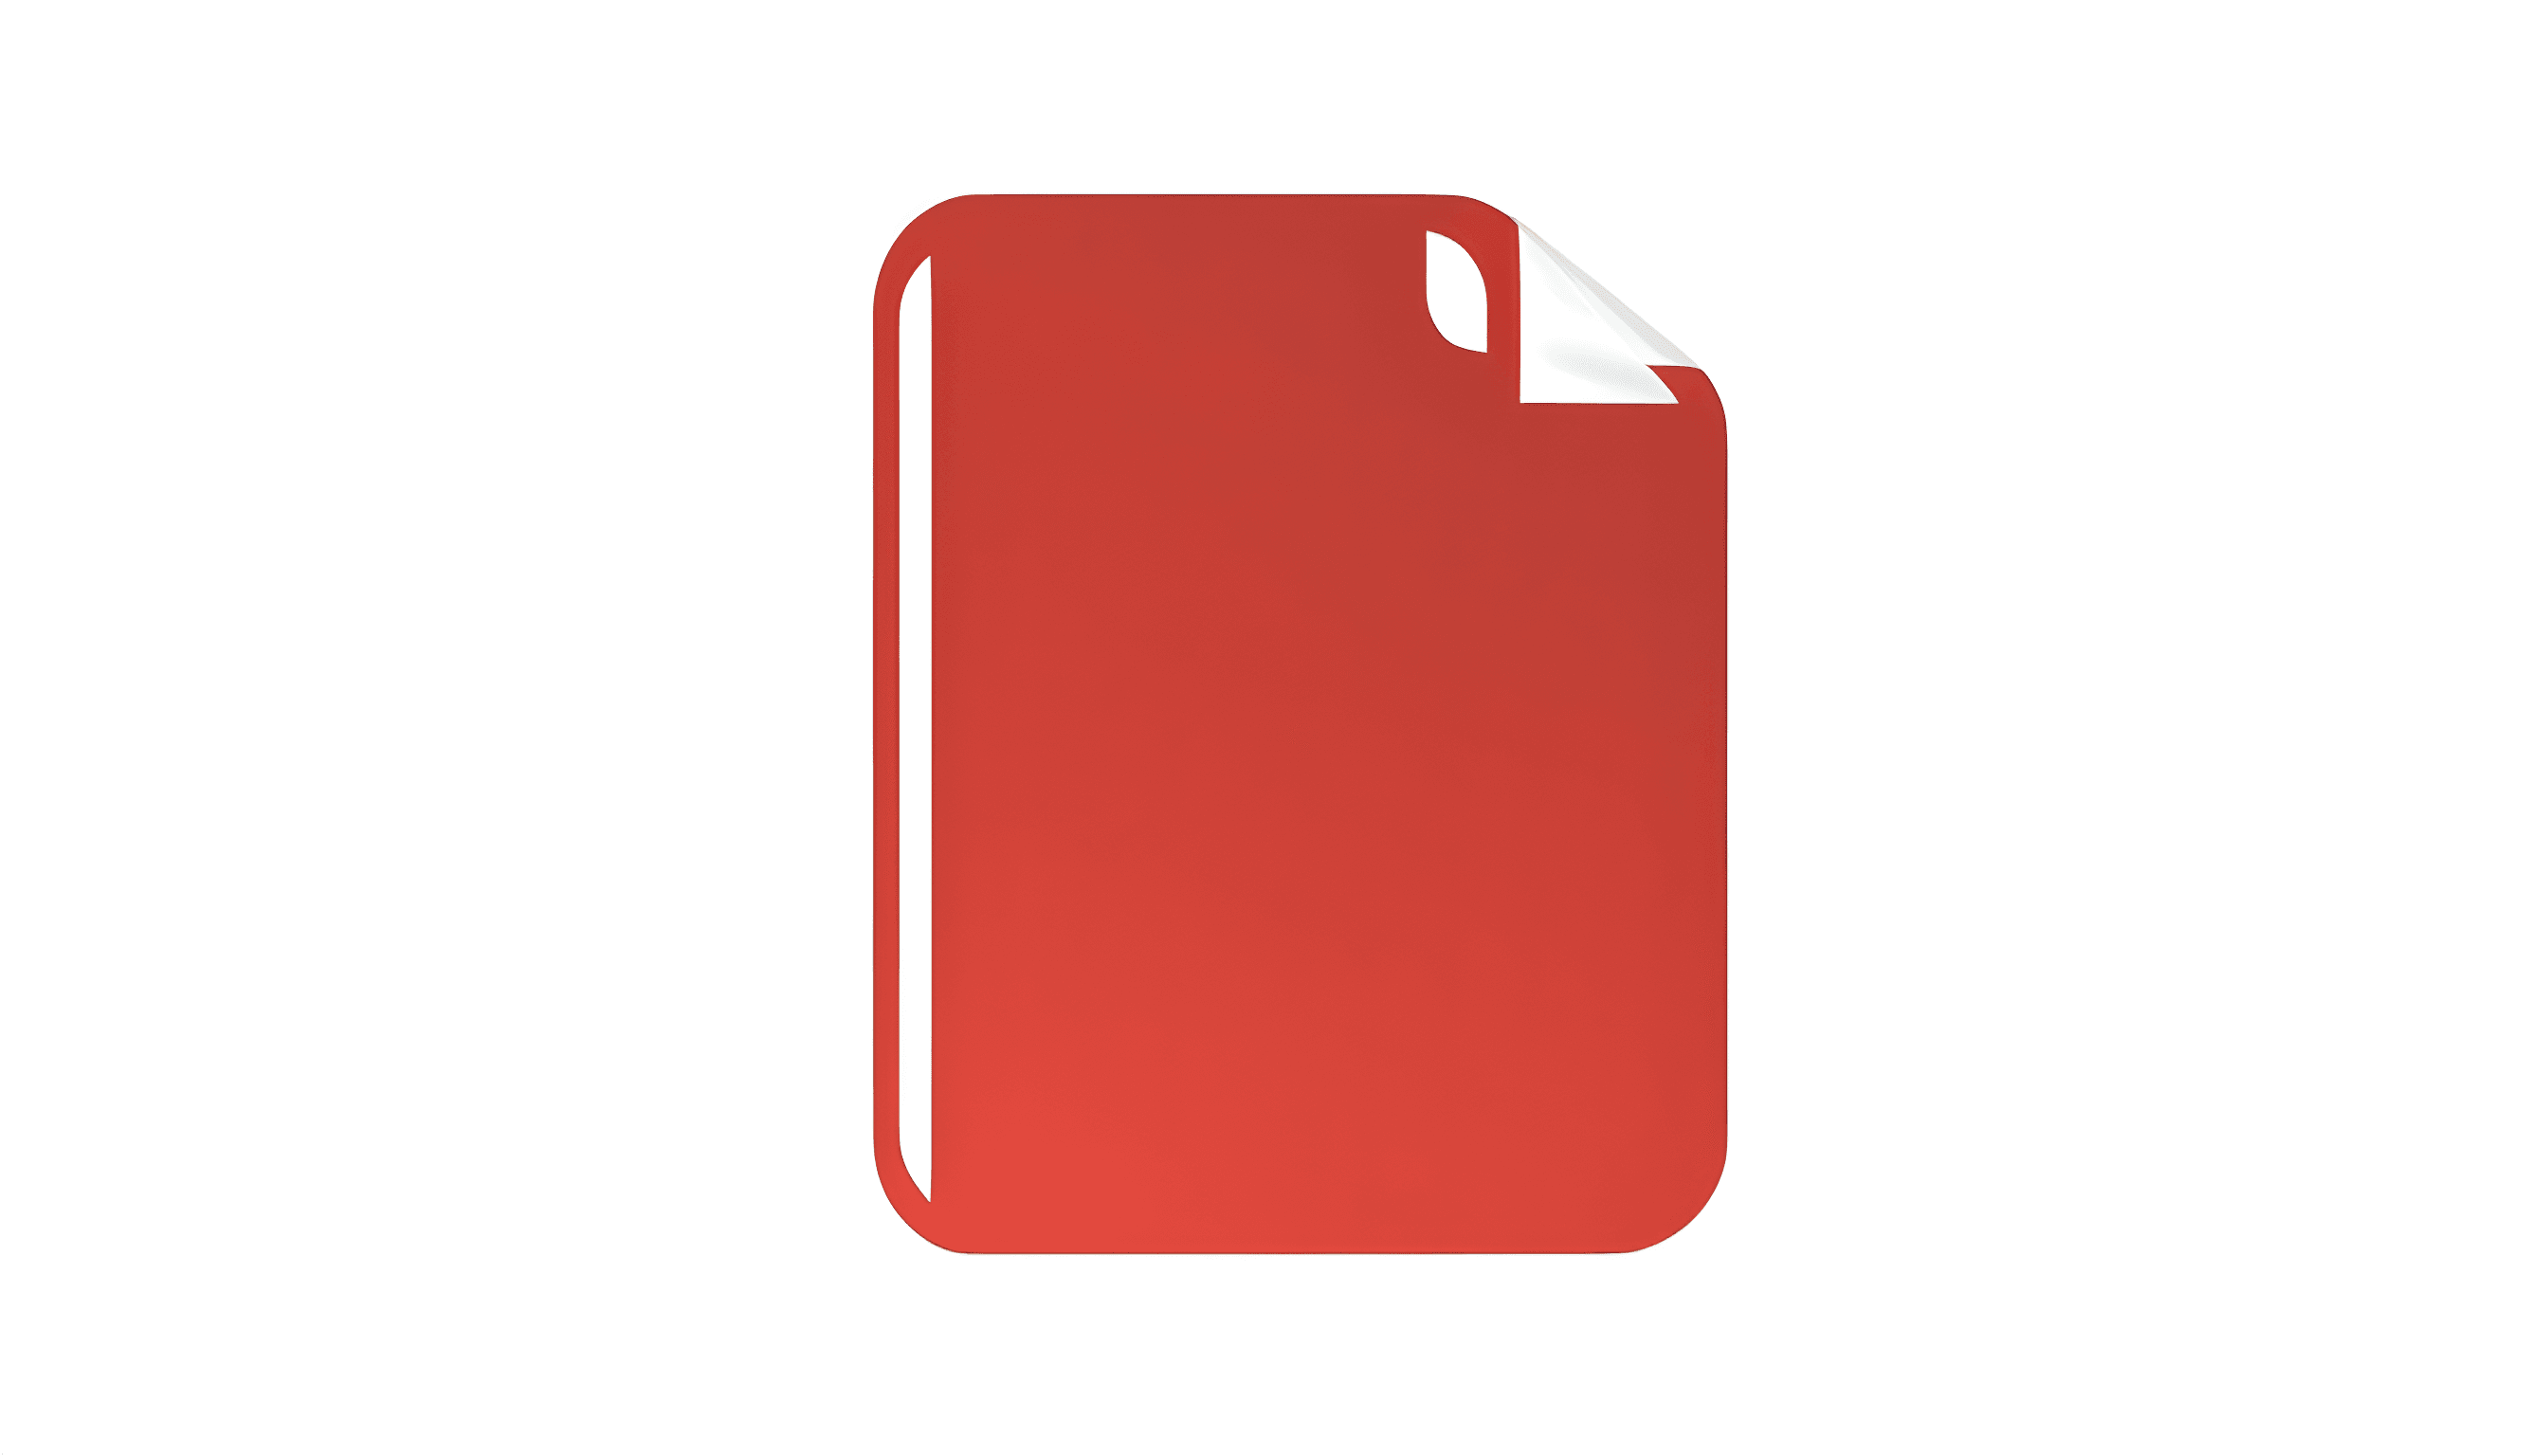 small-red-document-icon-with-transparent-backgroun